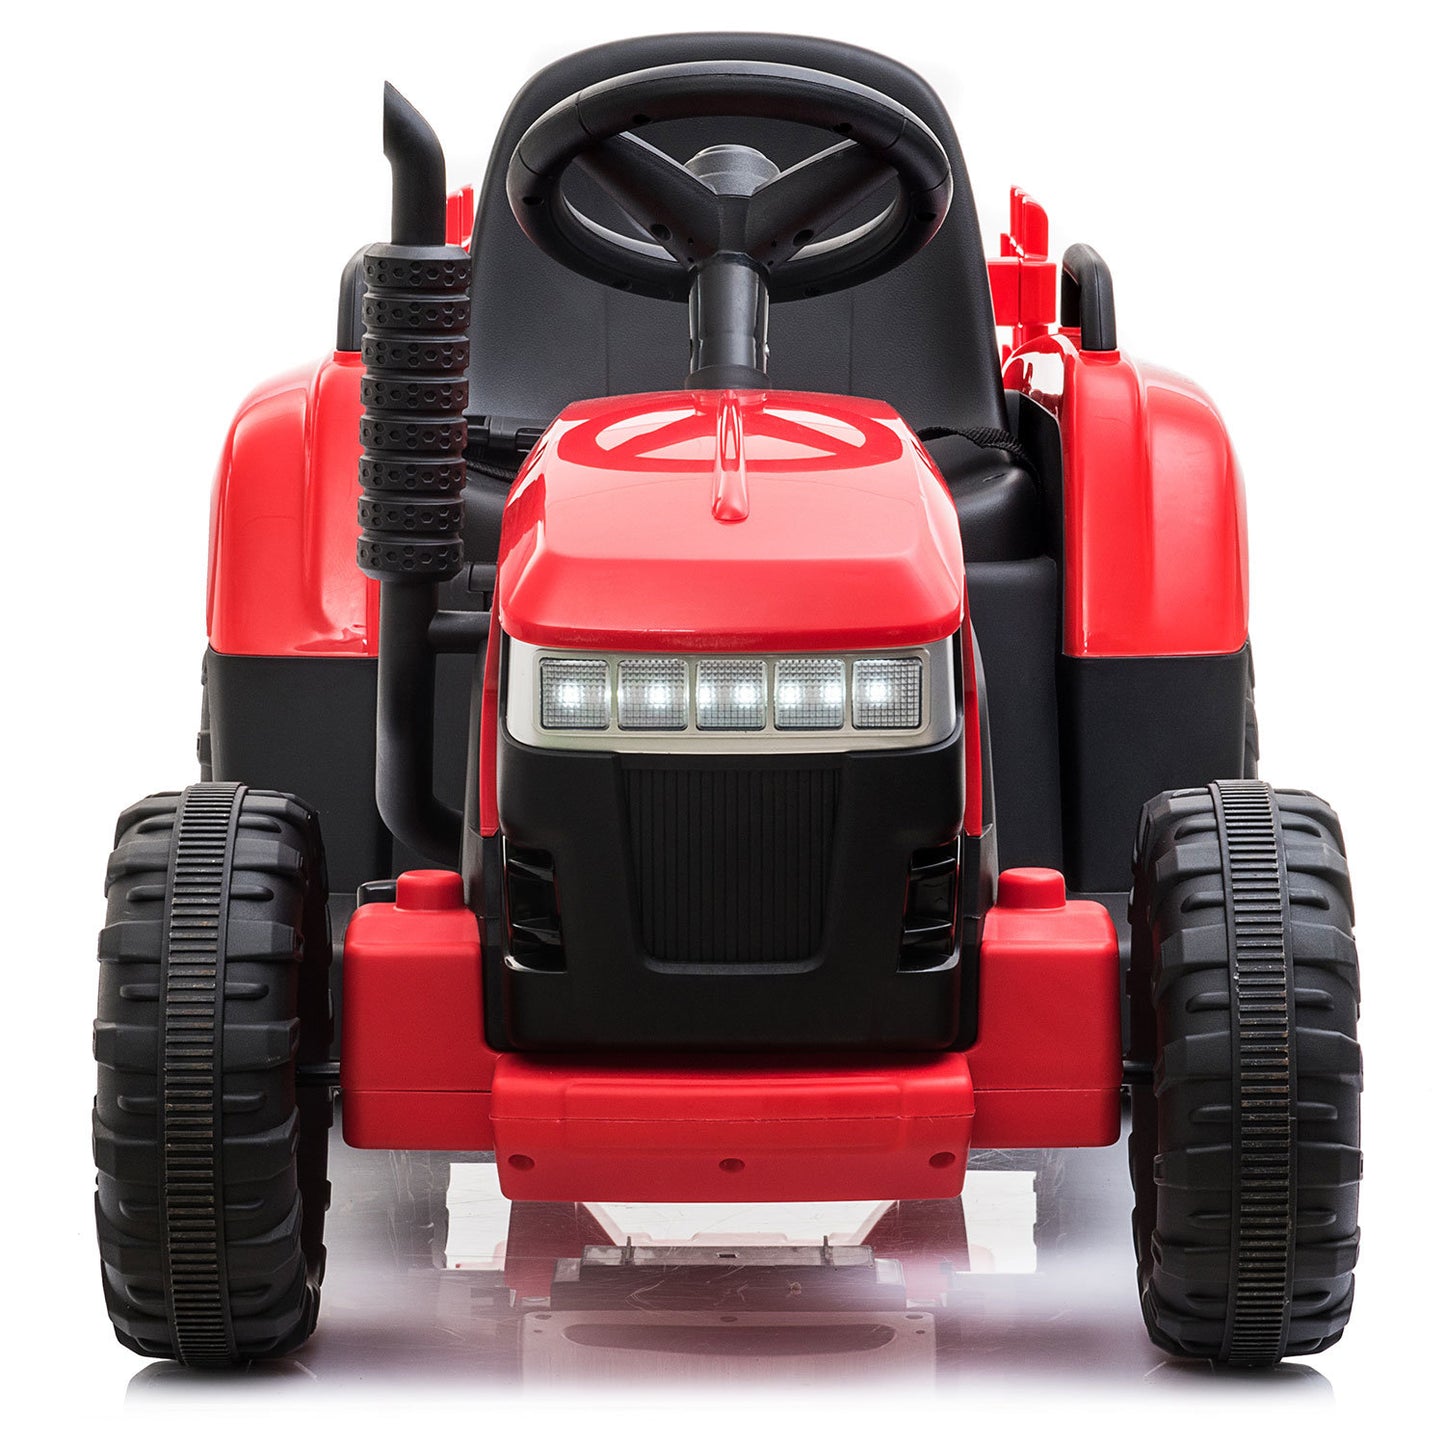 12V Kids Ride On Tractor with Trailer, Battery Powered Electric Car w/ Music, USB, Music, LED Lights, Vehicle Toy for 3 to 6 Ages, Red